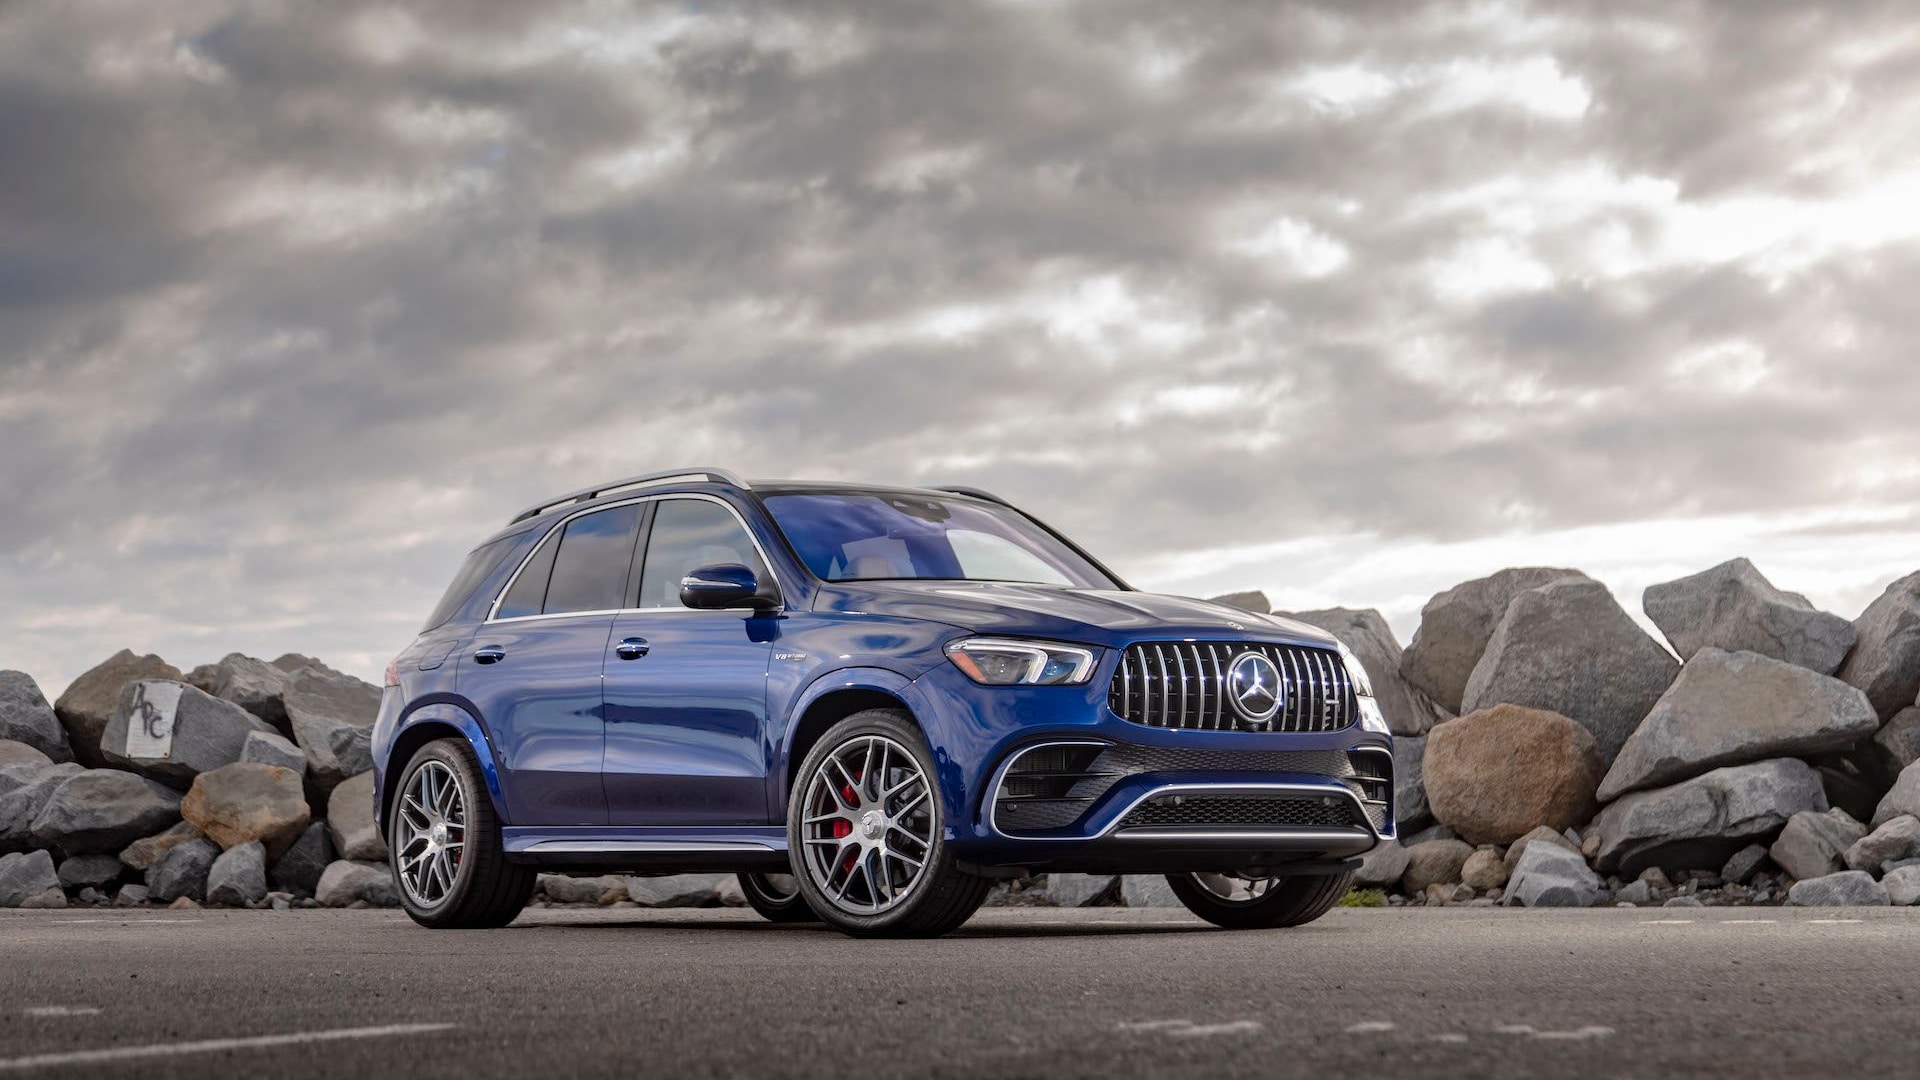 21 Mercedes Amg Gle63 S Coupe Arrives With 603 Horsepower 117 050 Price